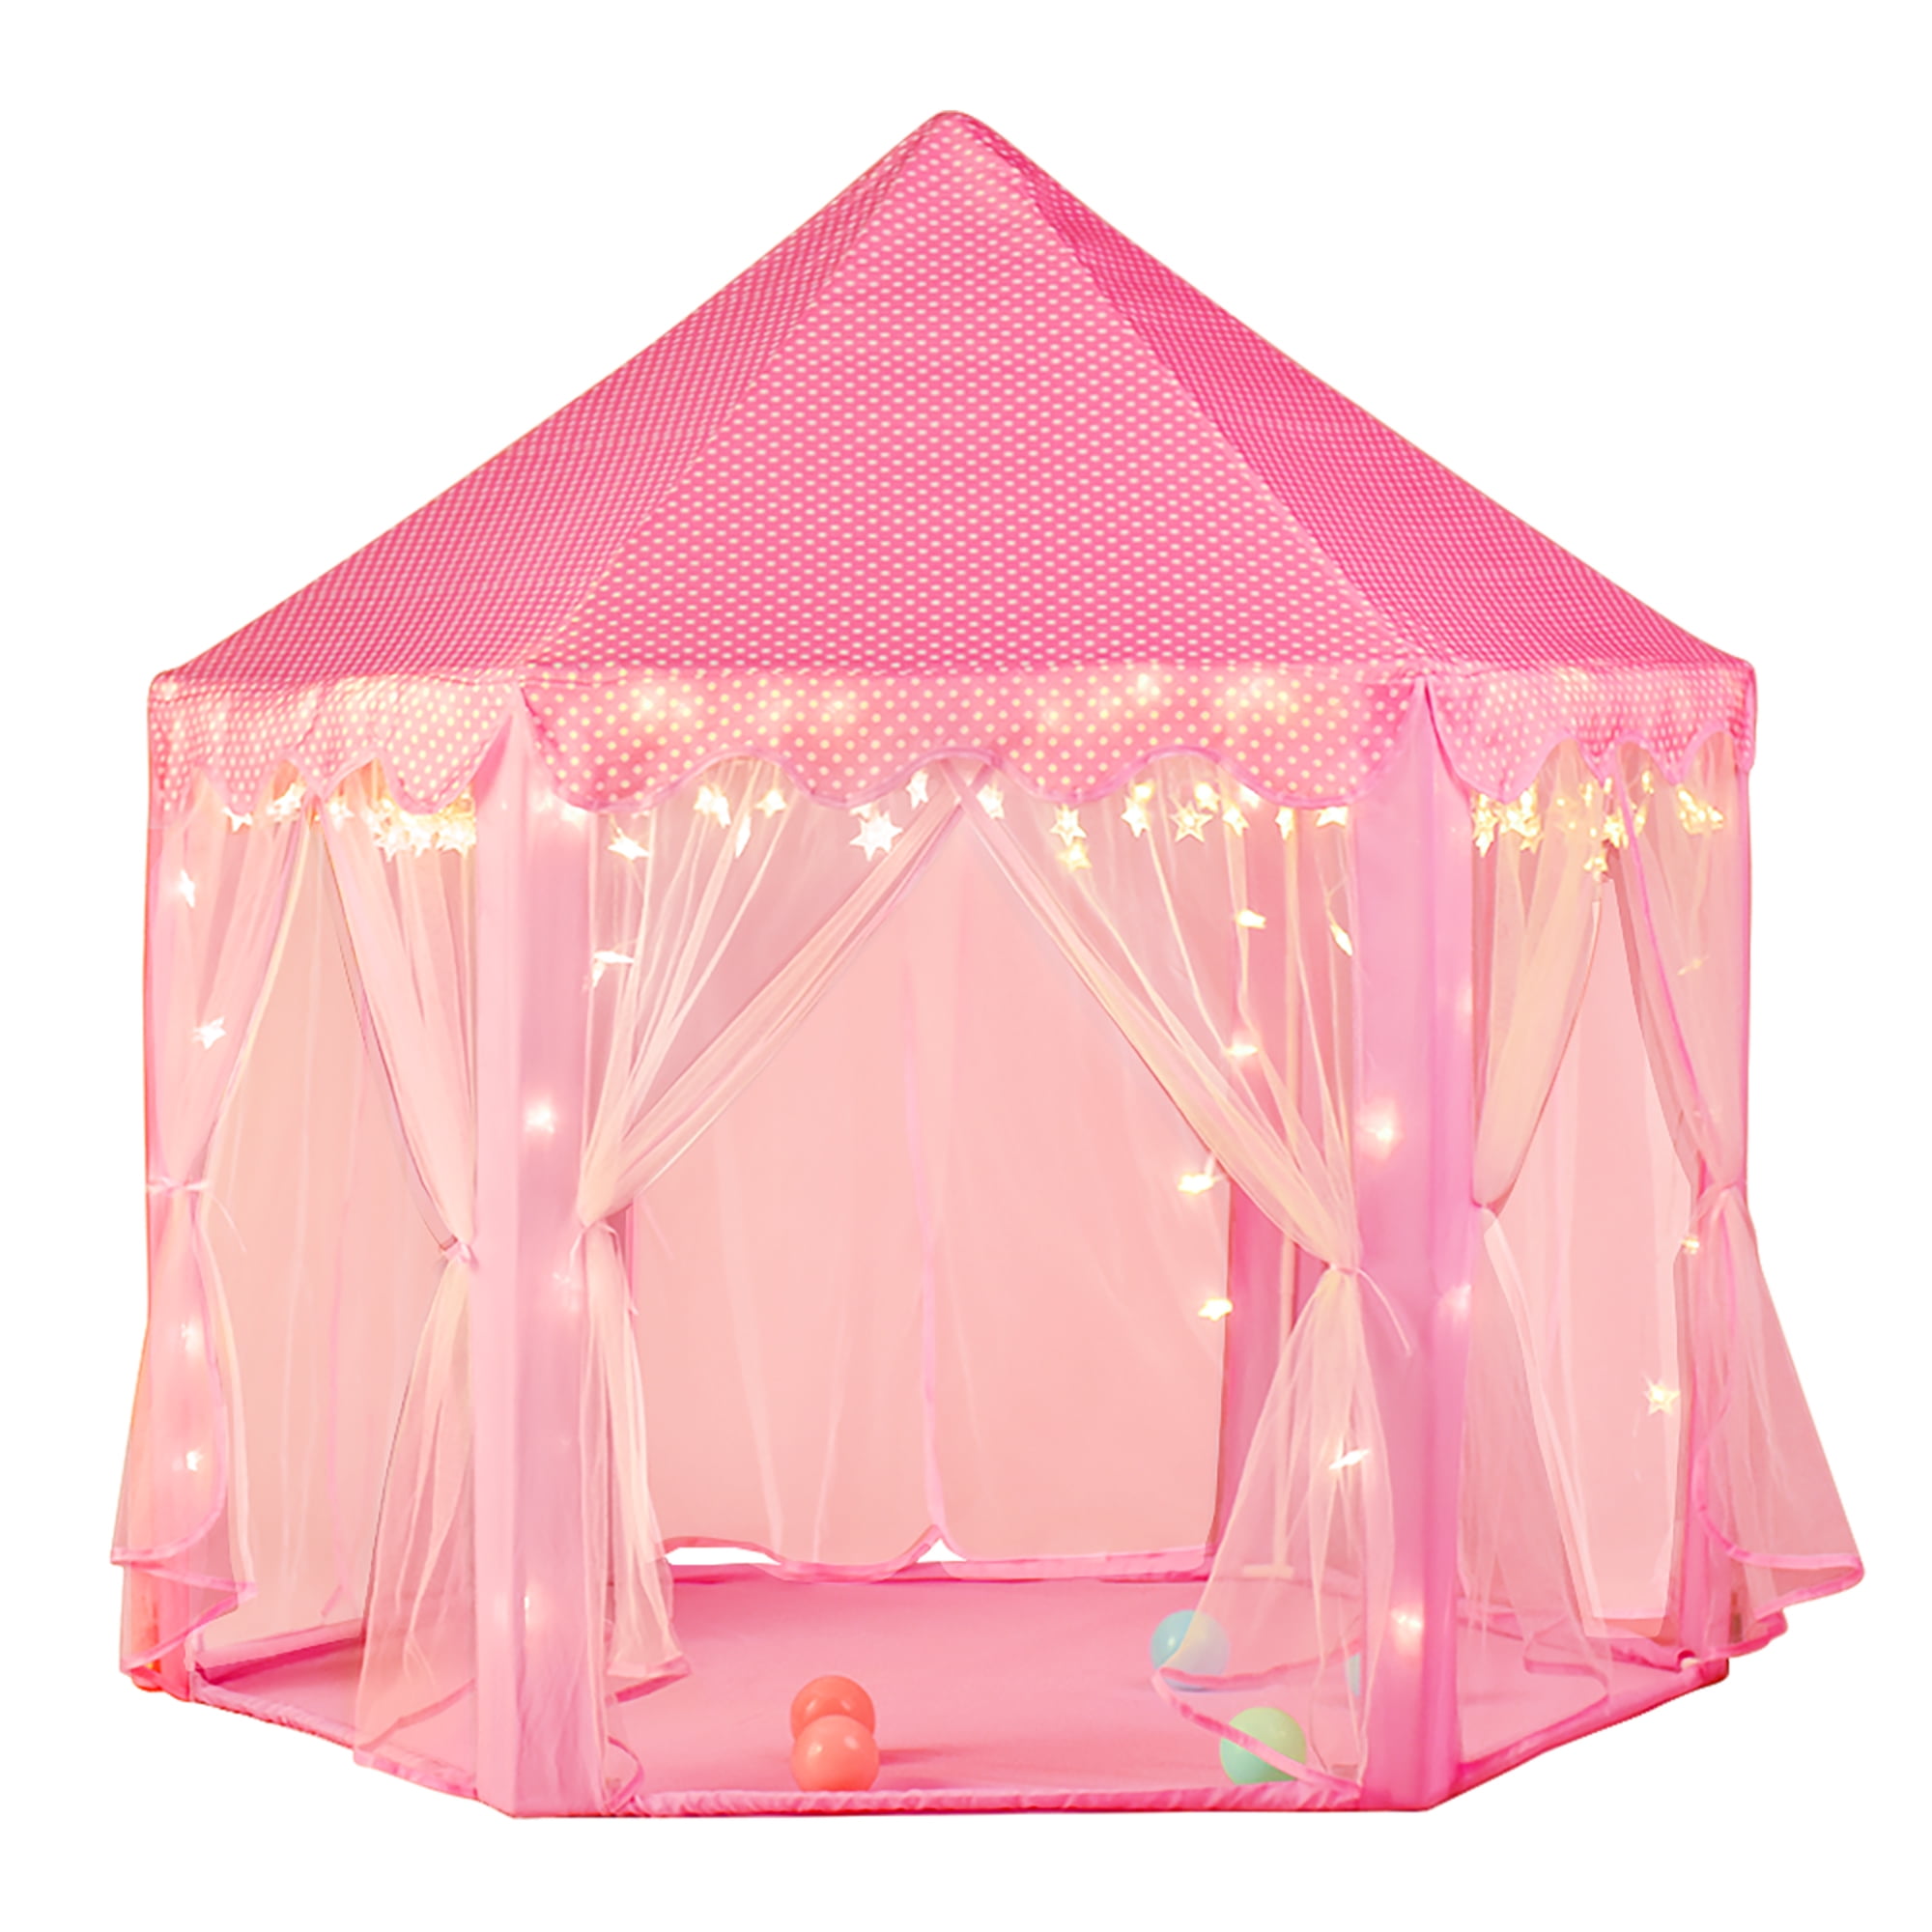 Tiny Land Children Play Tent for Girls Princess Castle Indoor 26amp Outdoor for sale online 